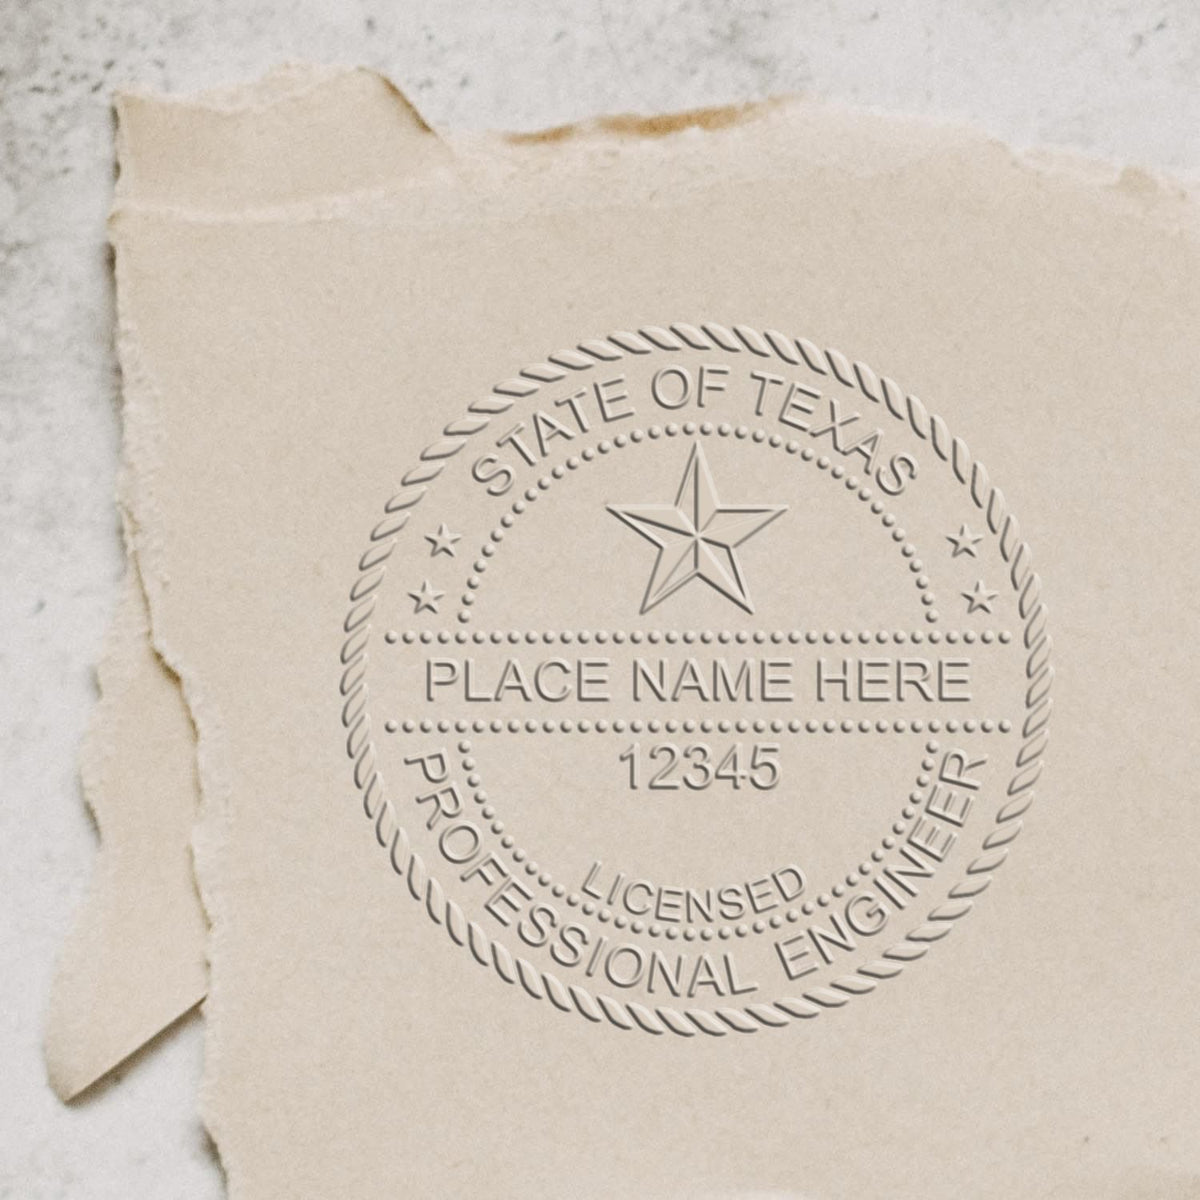 A photograph of the Hybrid Texas Engineer Seal stamp impression reveals a vivid, professional image of the on paper.